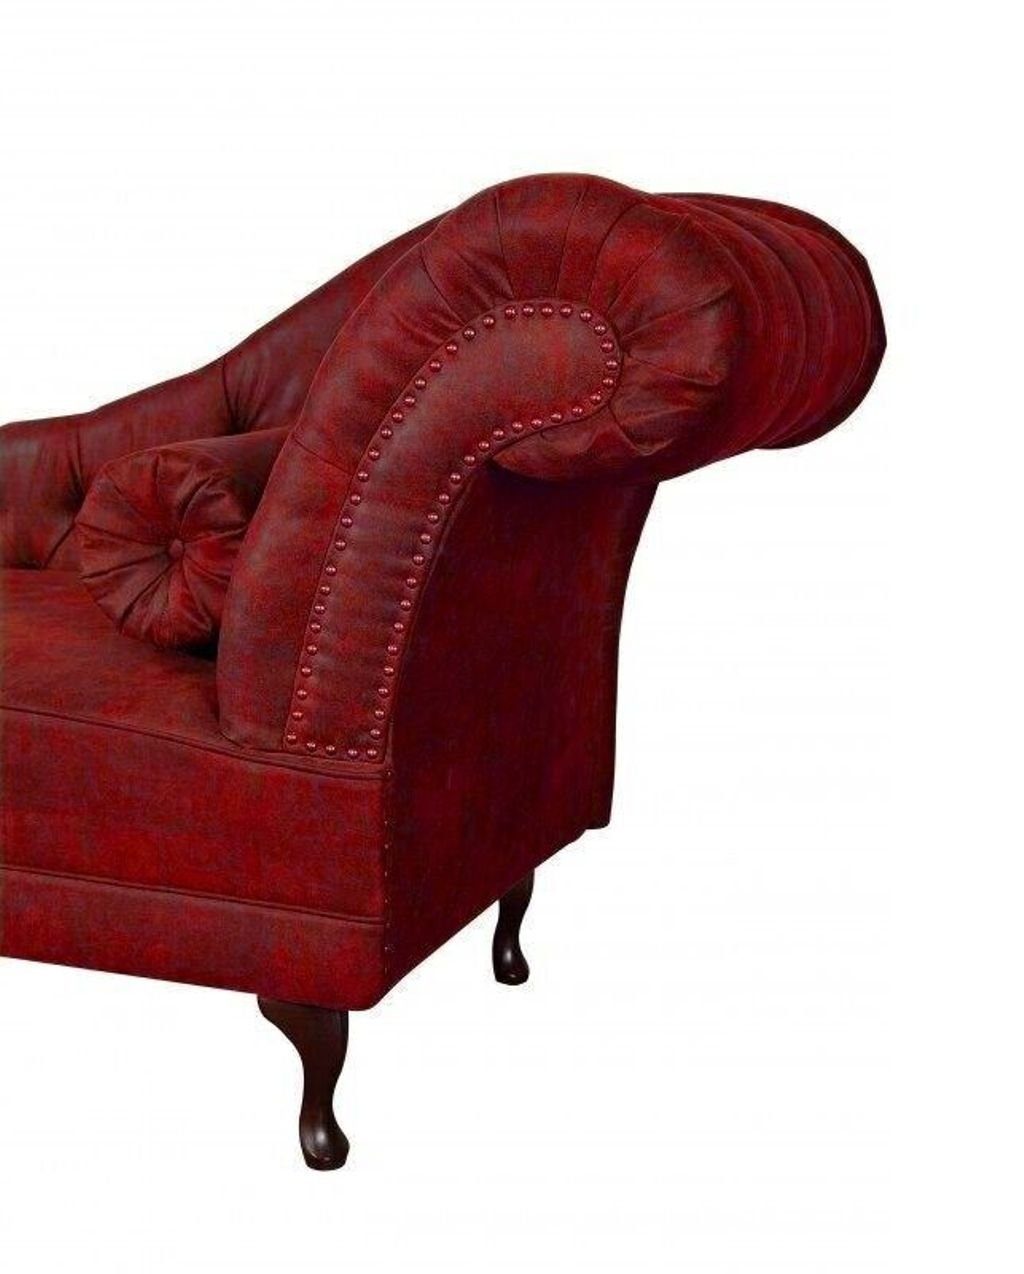 JVmoebel Chaiselongue in Textil Europa Sofa Chaise SOFORT, Rot Liege Teile, Made Chesterfield Relax 1 Chaiselongues